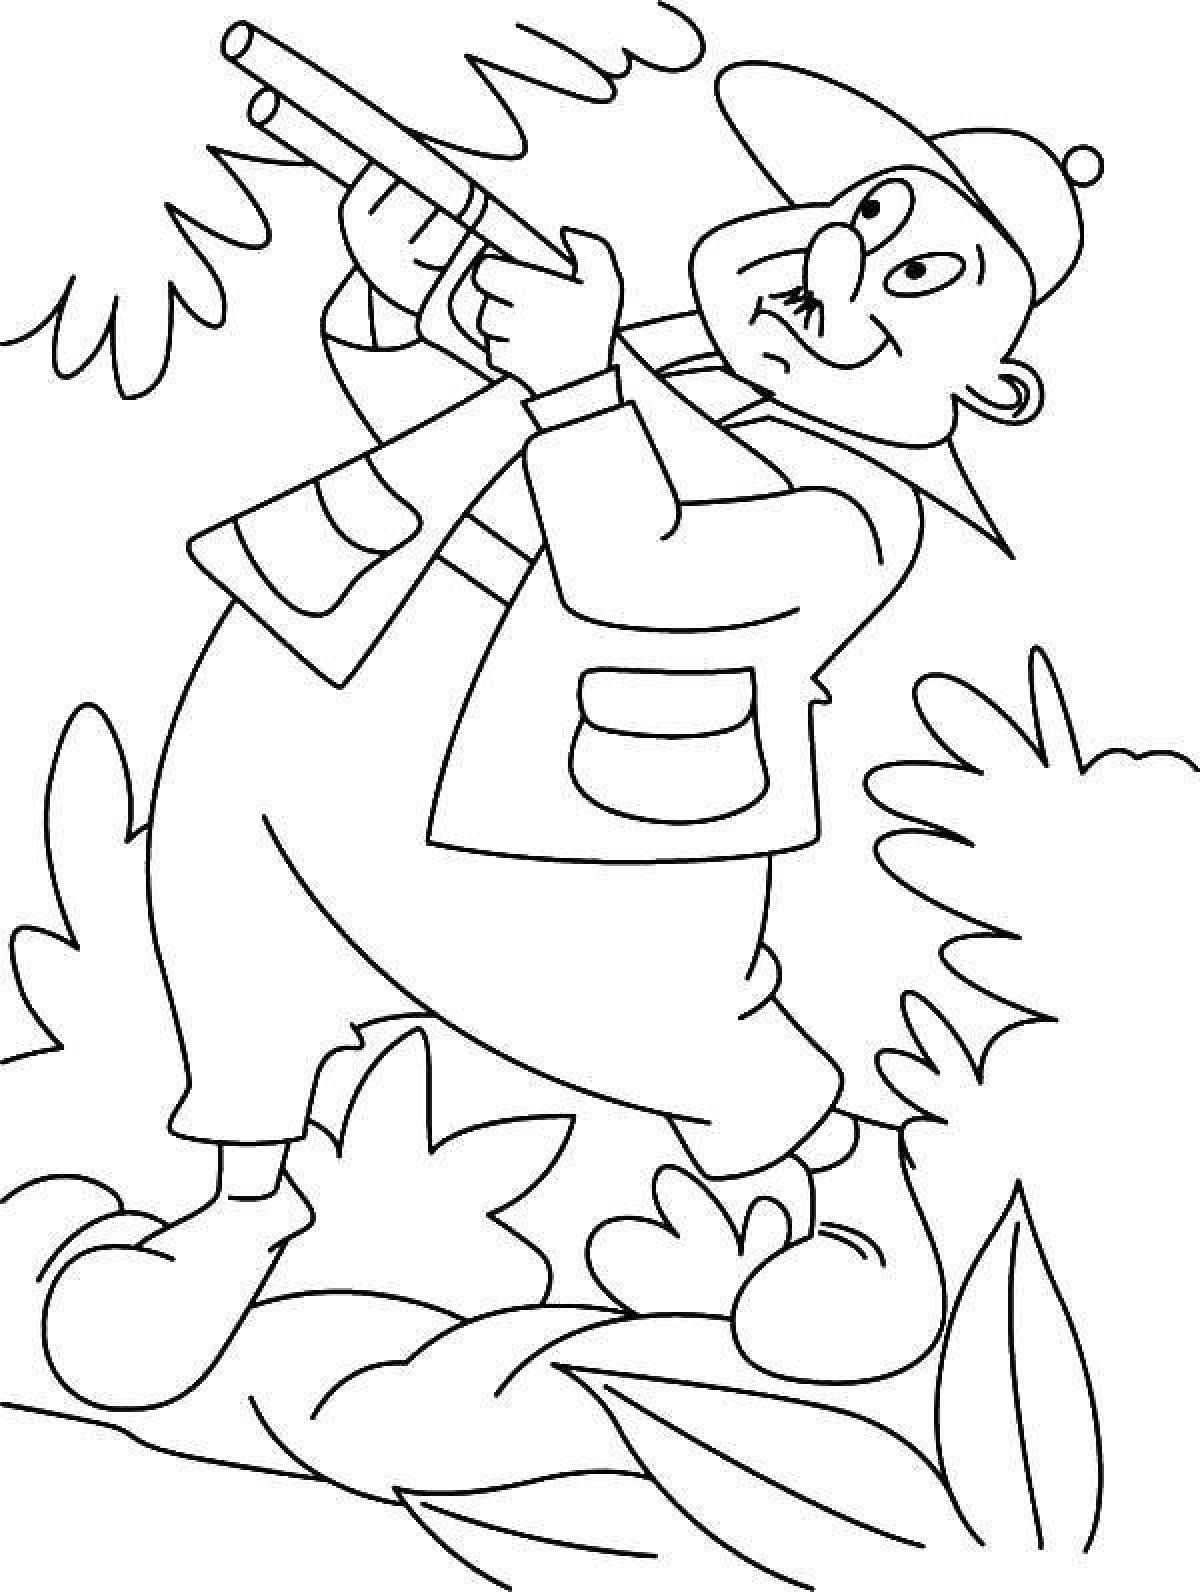 Adventurous hunter coloring page